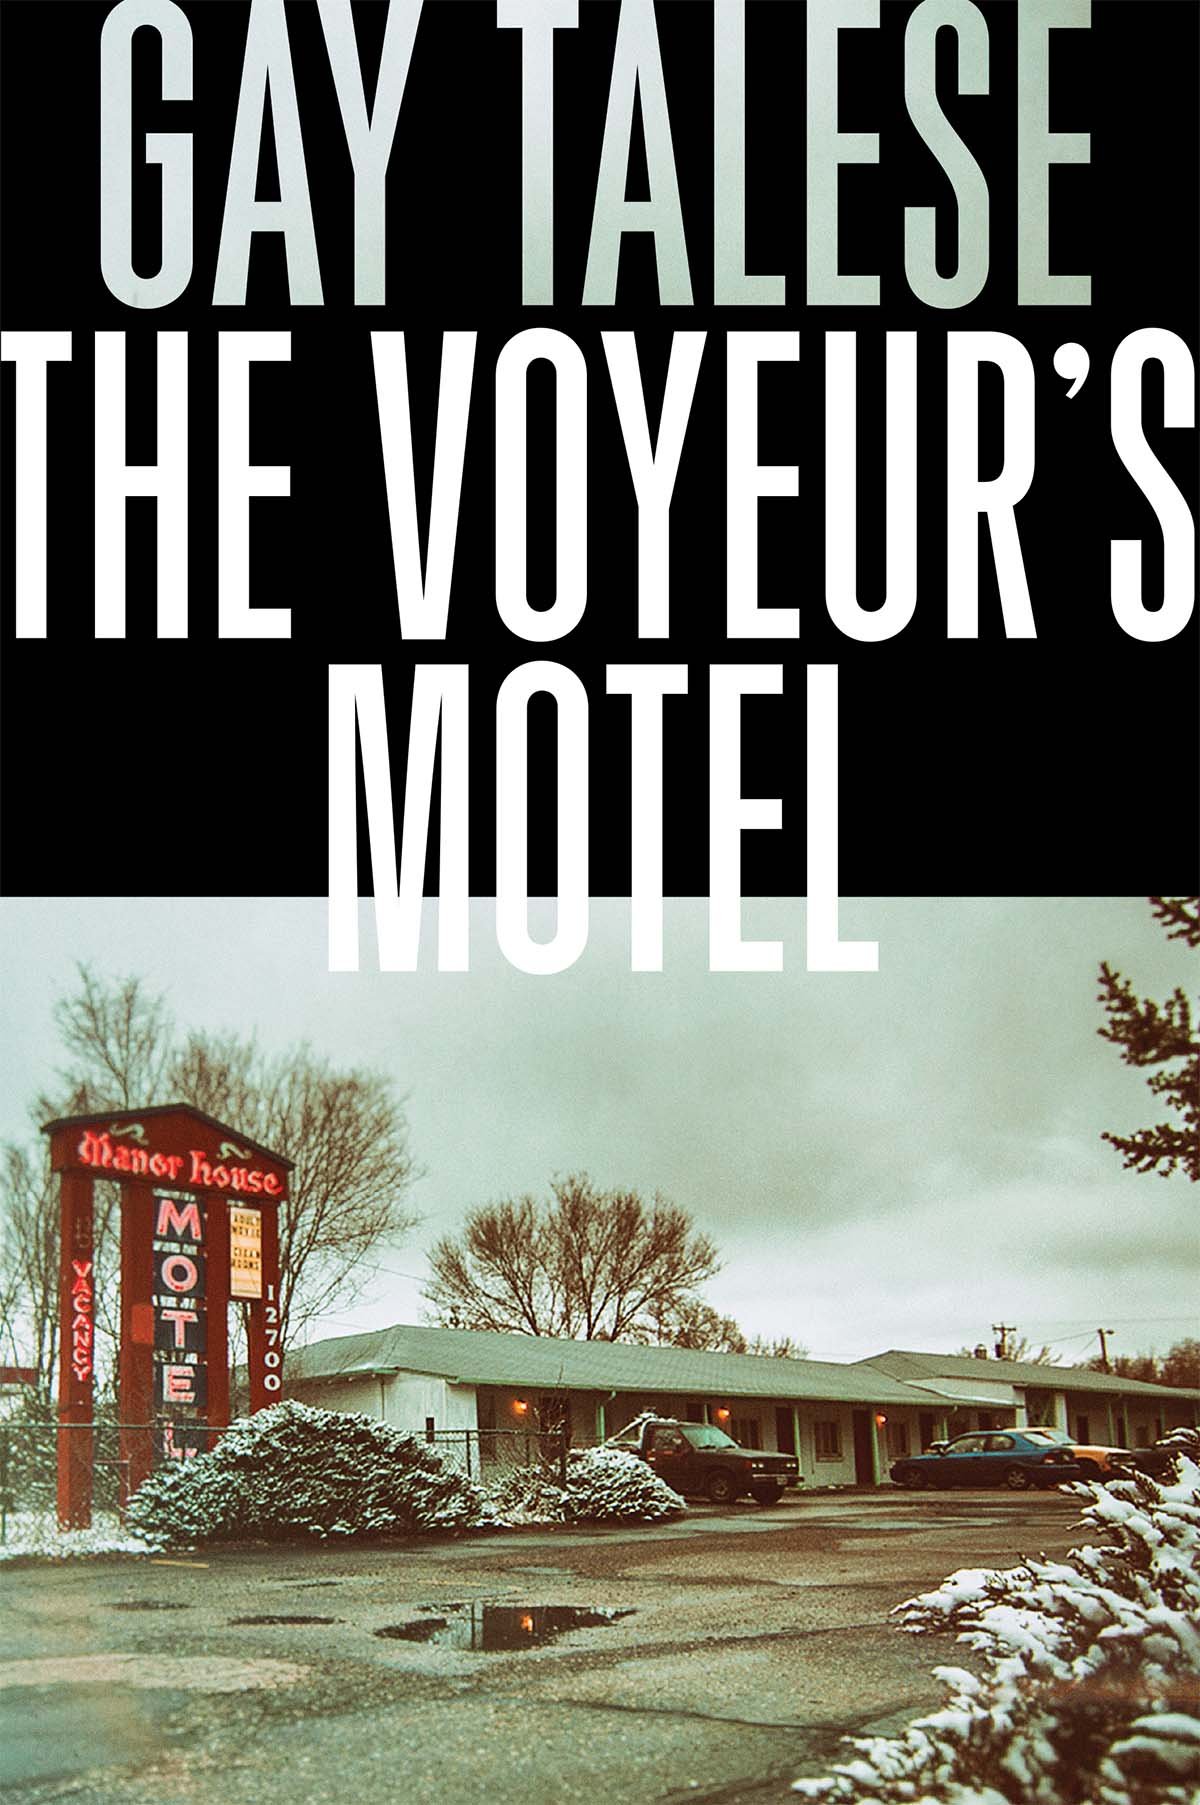 5. 'The Voyeur's Motel' by Gay Talese